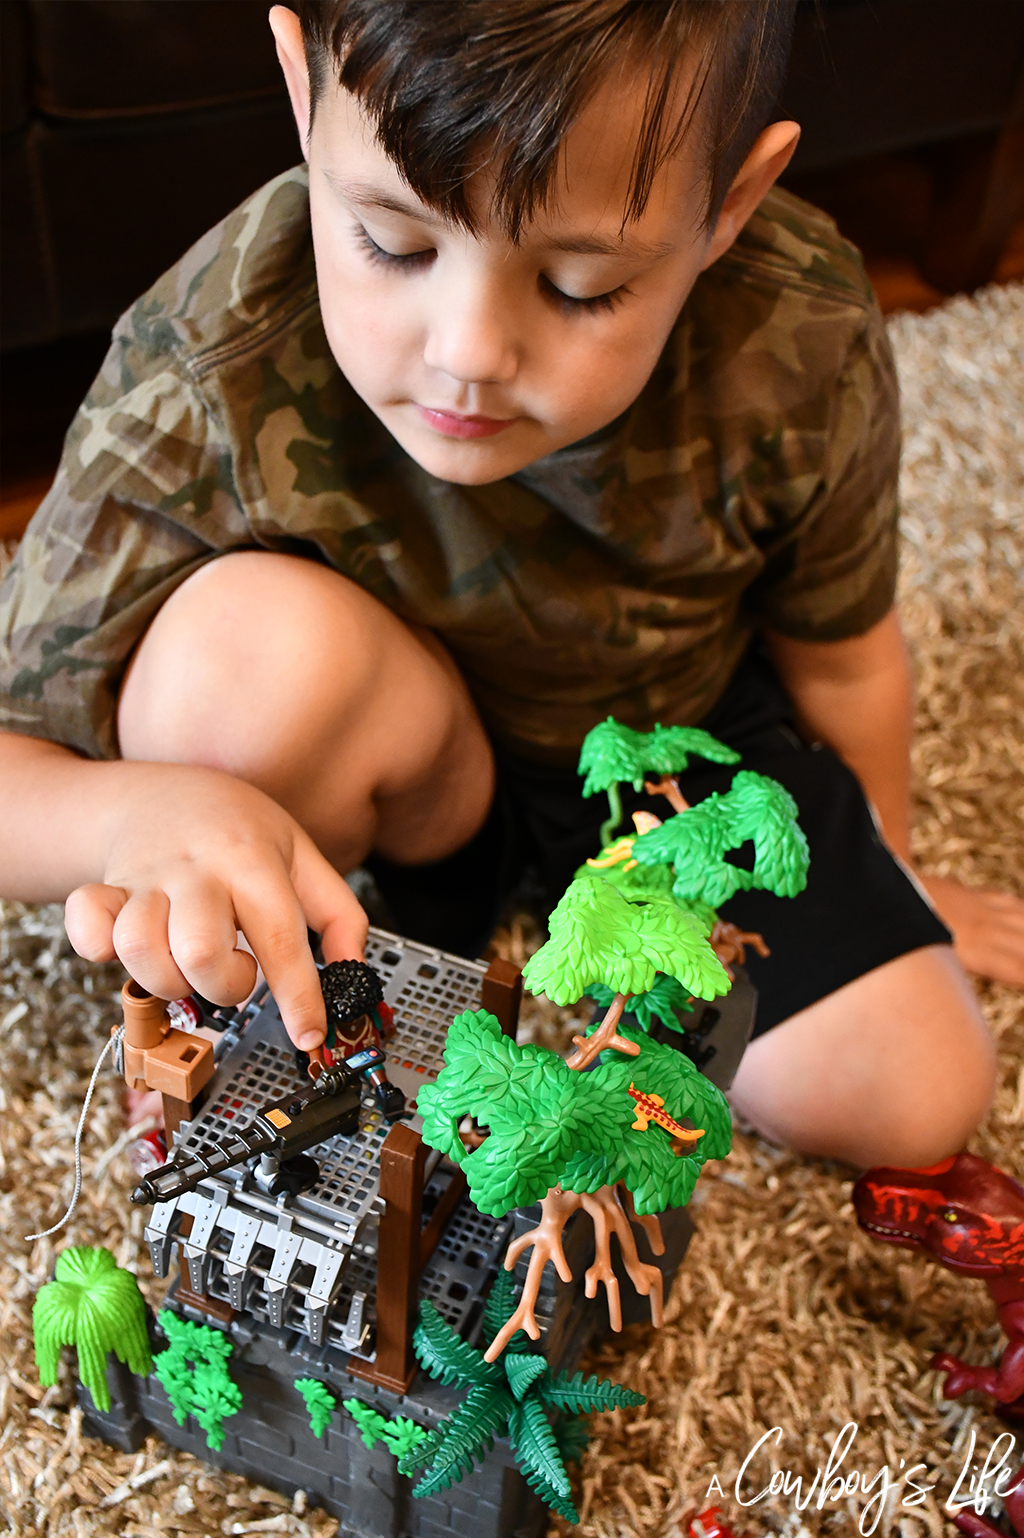 Importance of imaginative play